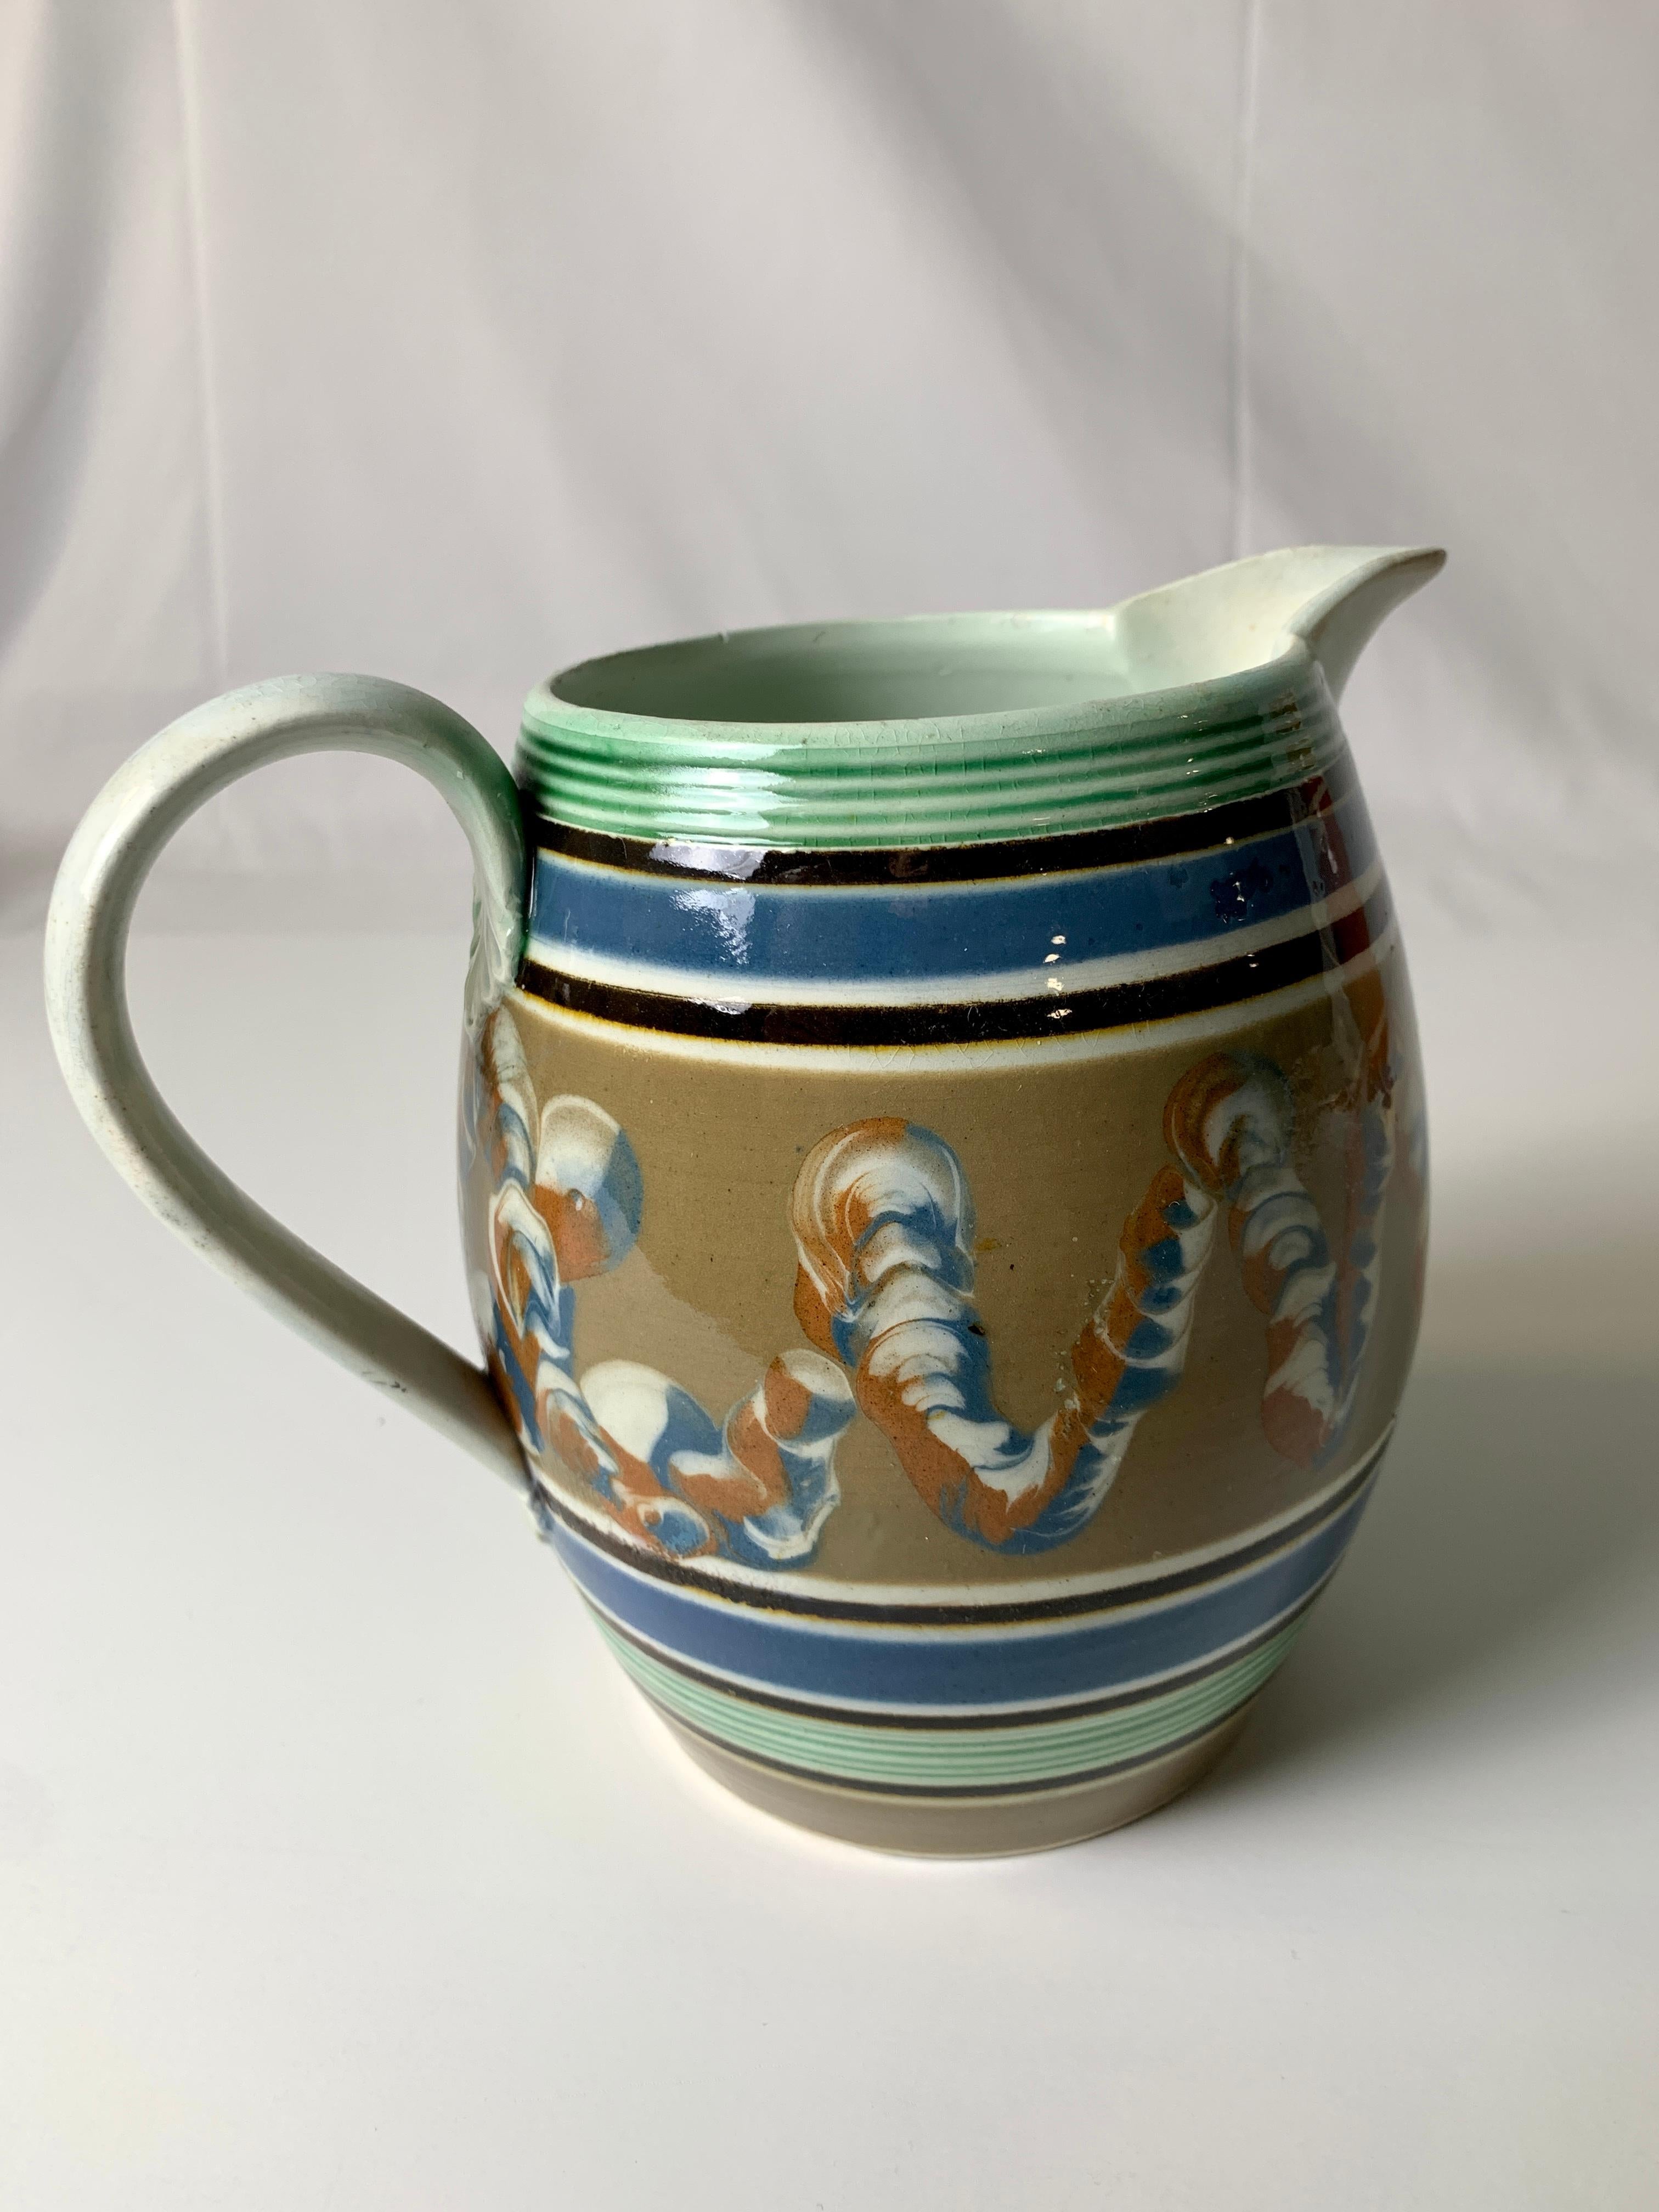 19th Century Mochaware Pitcher Decorated with Soft Blue Green & Brown Made England, c- 1820